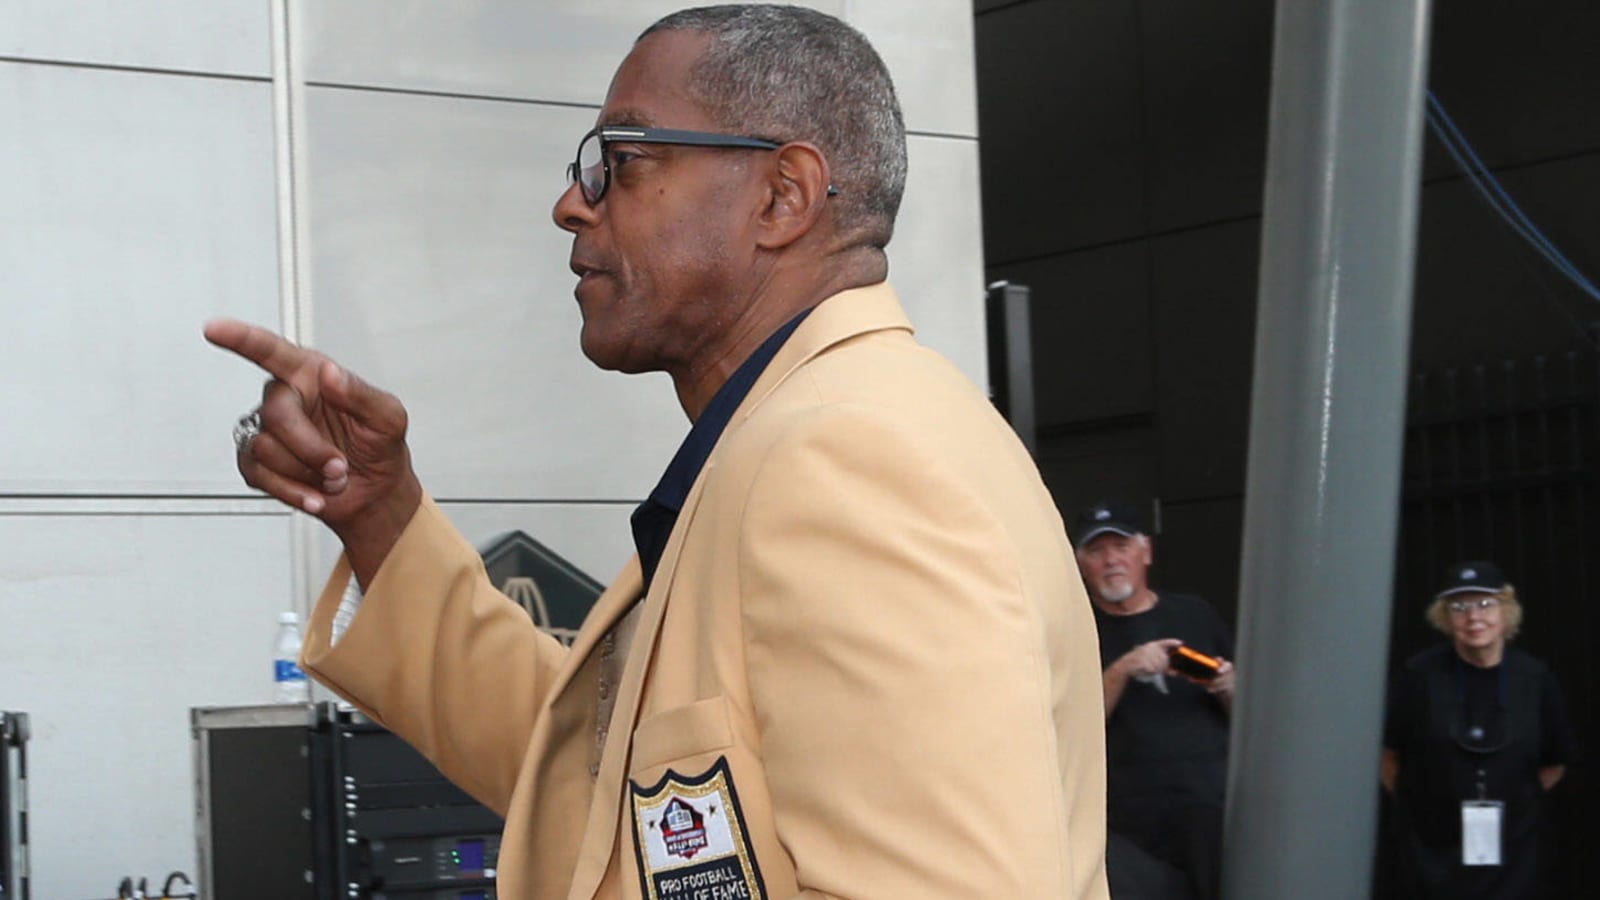 Tony Dorsett shouts out Derrick Henry for tying his record